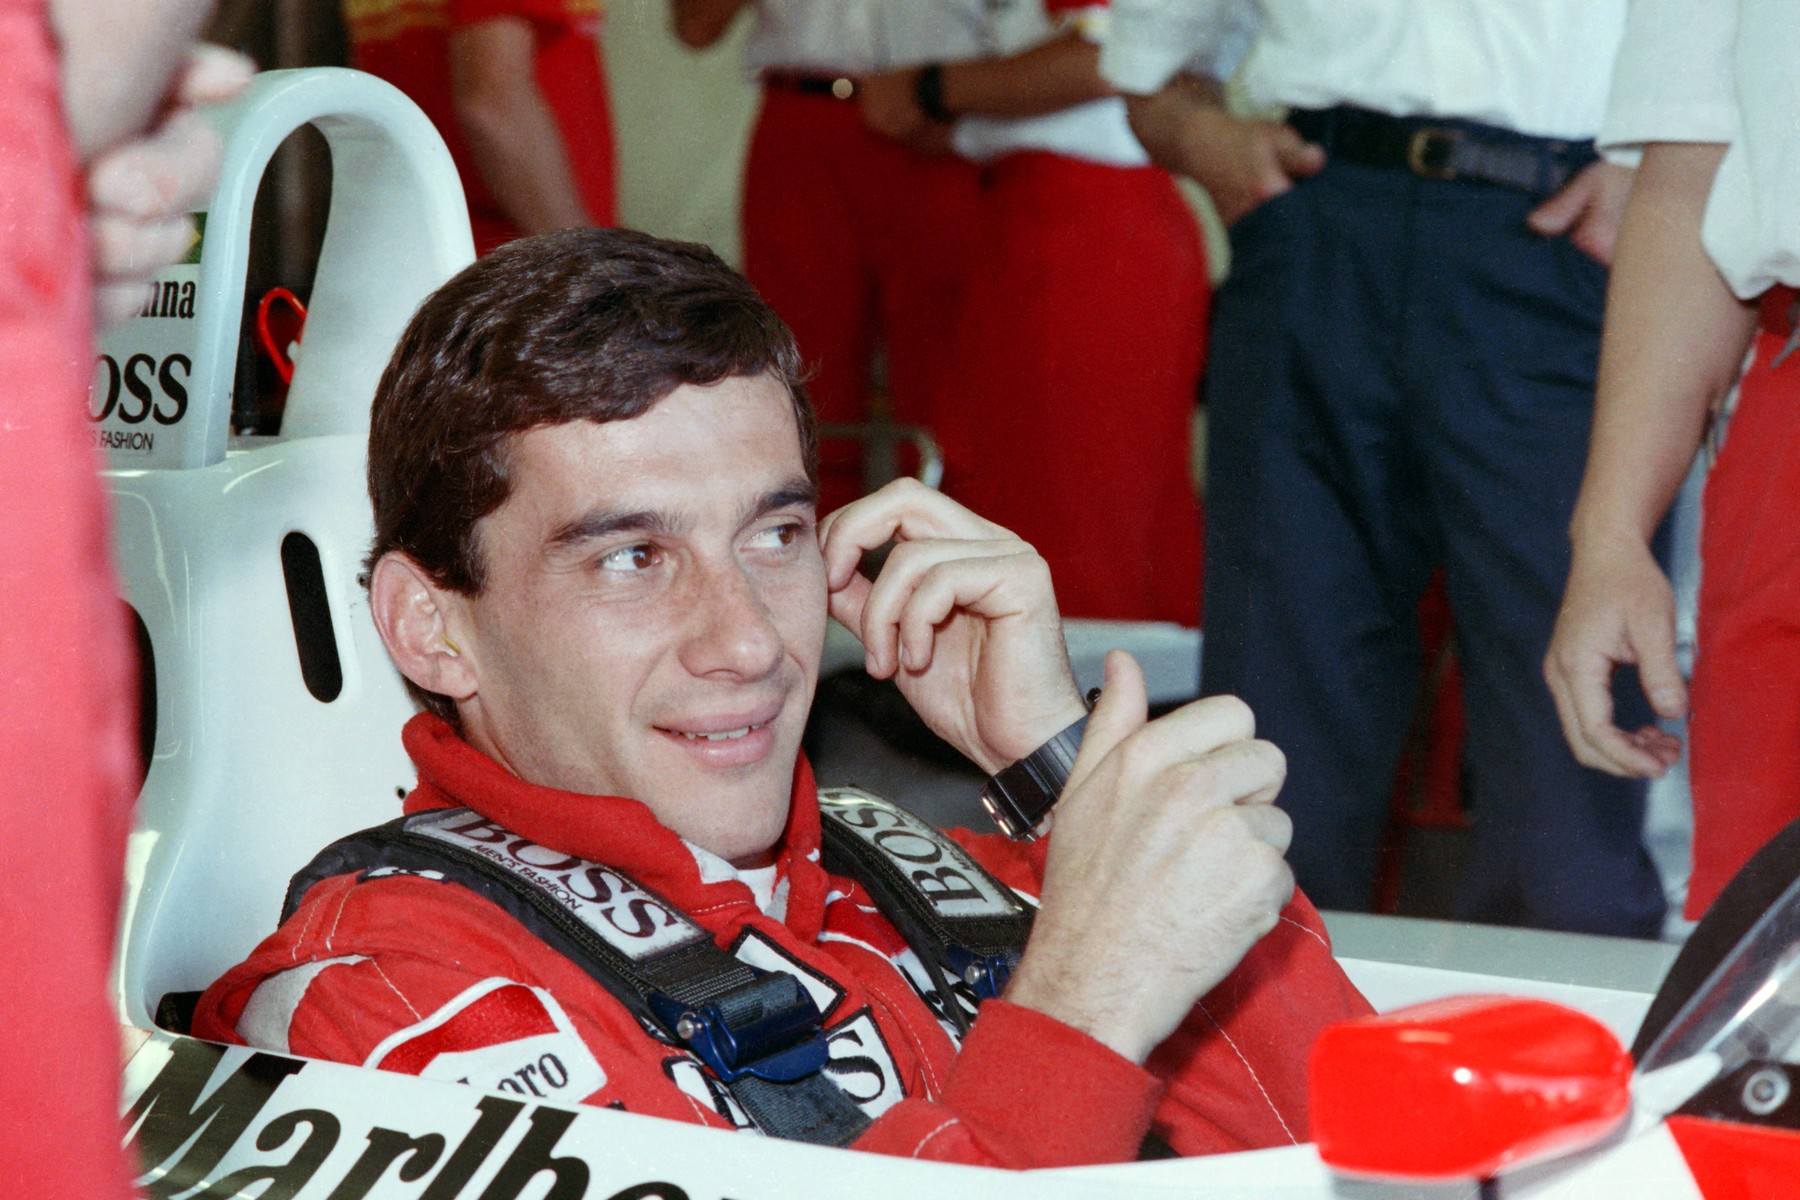 New world champion Ayrton Senna of Brazil smiles to his staff members in the pit during the final qualifying for the Australian F1 Grand Prix in Adelaide on November 12, 1988.,Image: 425803642, License: Rights-managed, Restrictions: , Model Release: no, Credit line: AFP / AFP / Profimedia